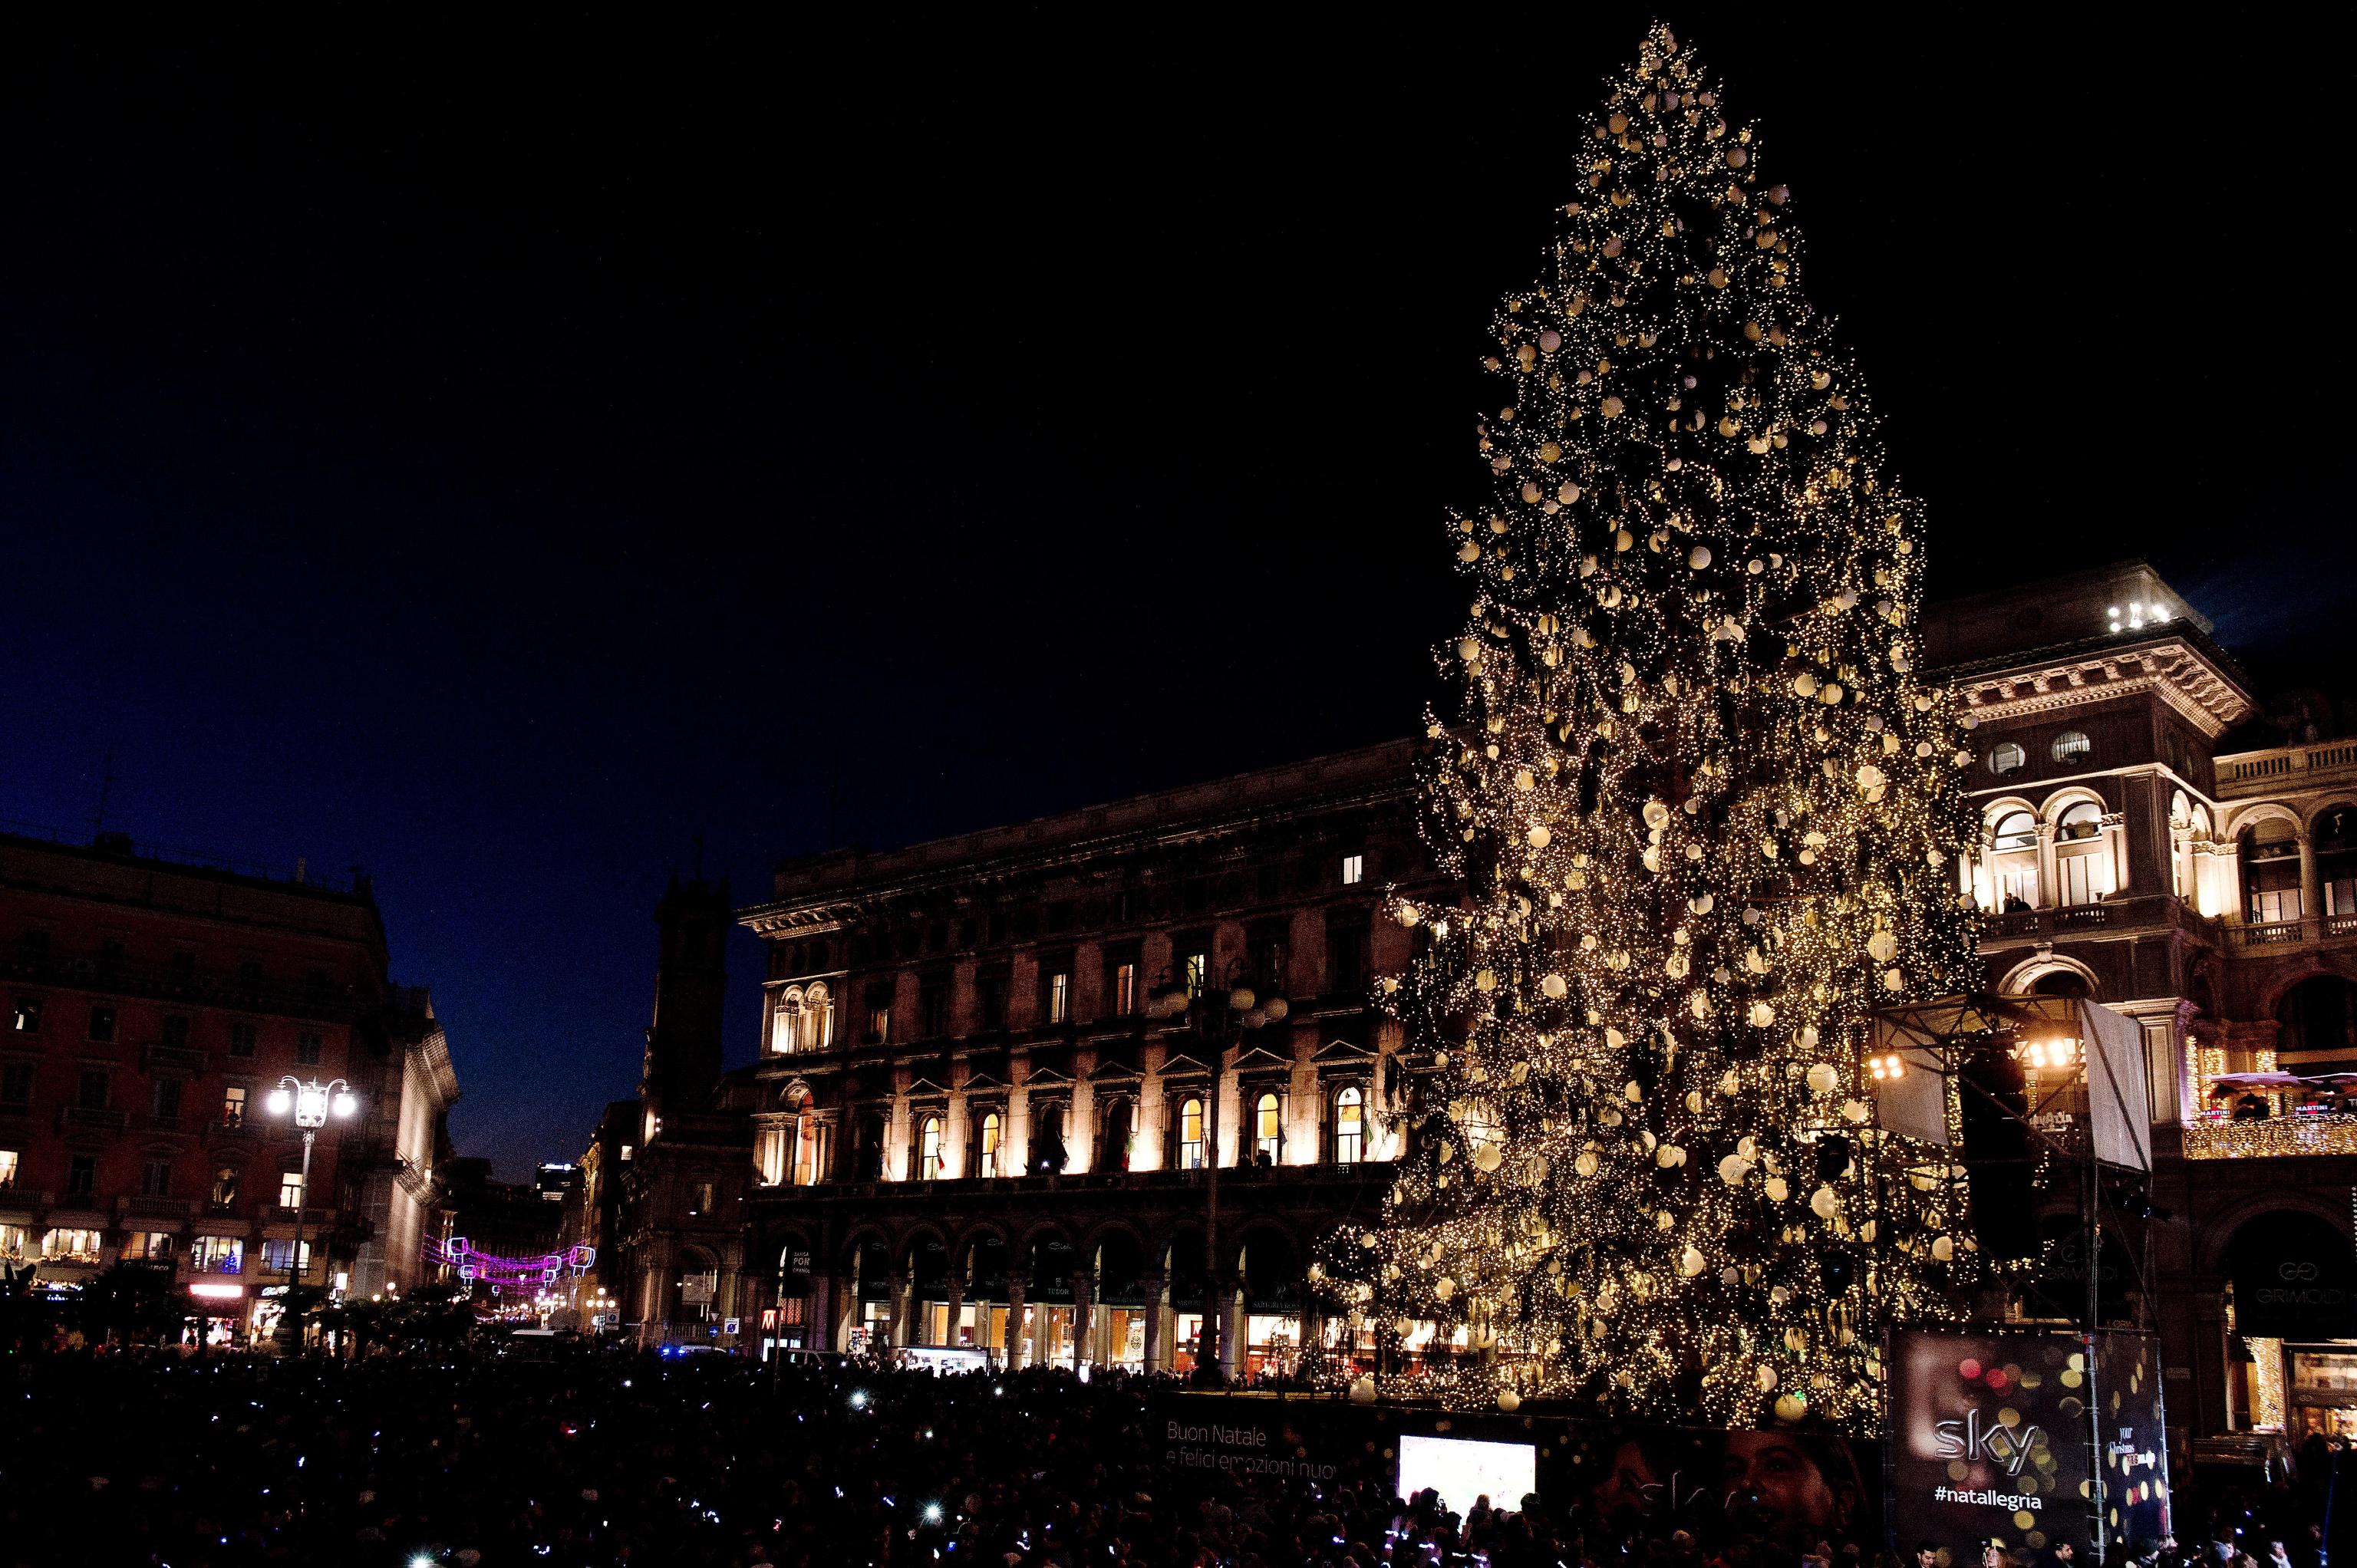 People attend the Christmas tree lighting ceremony at Duomo's square in Milan, Italy, 06 December 2017.
ANSA/SKY PRESS OFFICE/JULE HERING
+++ ANSA PROVIDES ACCESS TO THIS HANDOUT PHOTO TO BE USED SOLELY TO ILLUSTRATE NEWS REPORTING OR COMMENTARY ON THE FACTS OR EVENTS DEPICTED IN THIS IMAGE; NO ARCHIVING; NO LICENSING +++